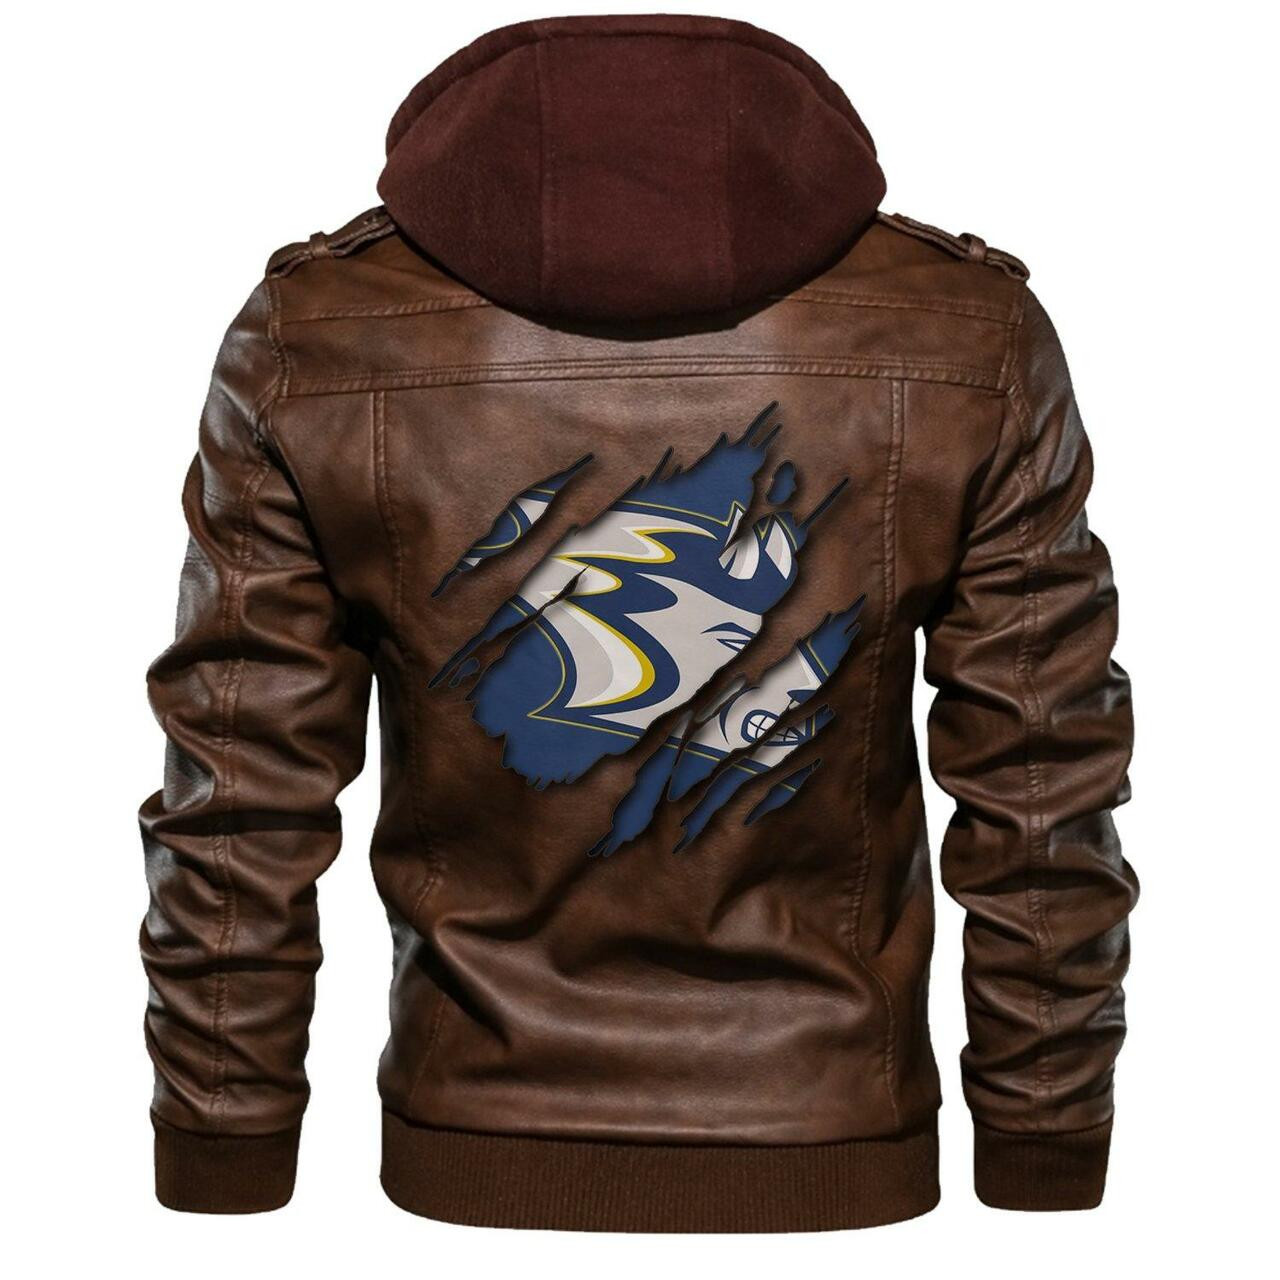 This leather Jacket will look great on you and make you stand out from the crowd 21